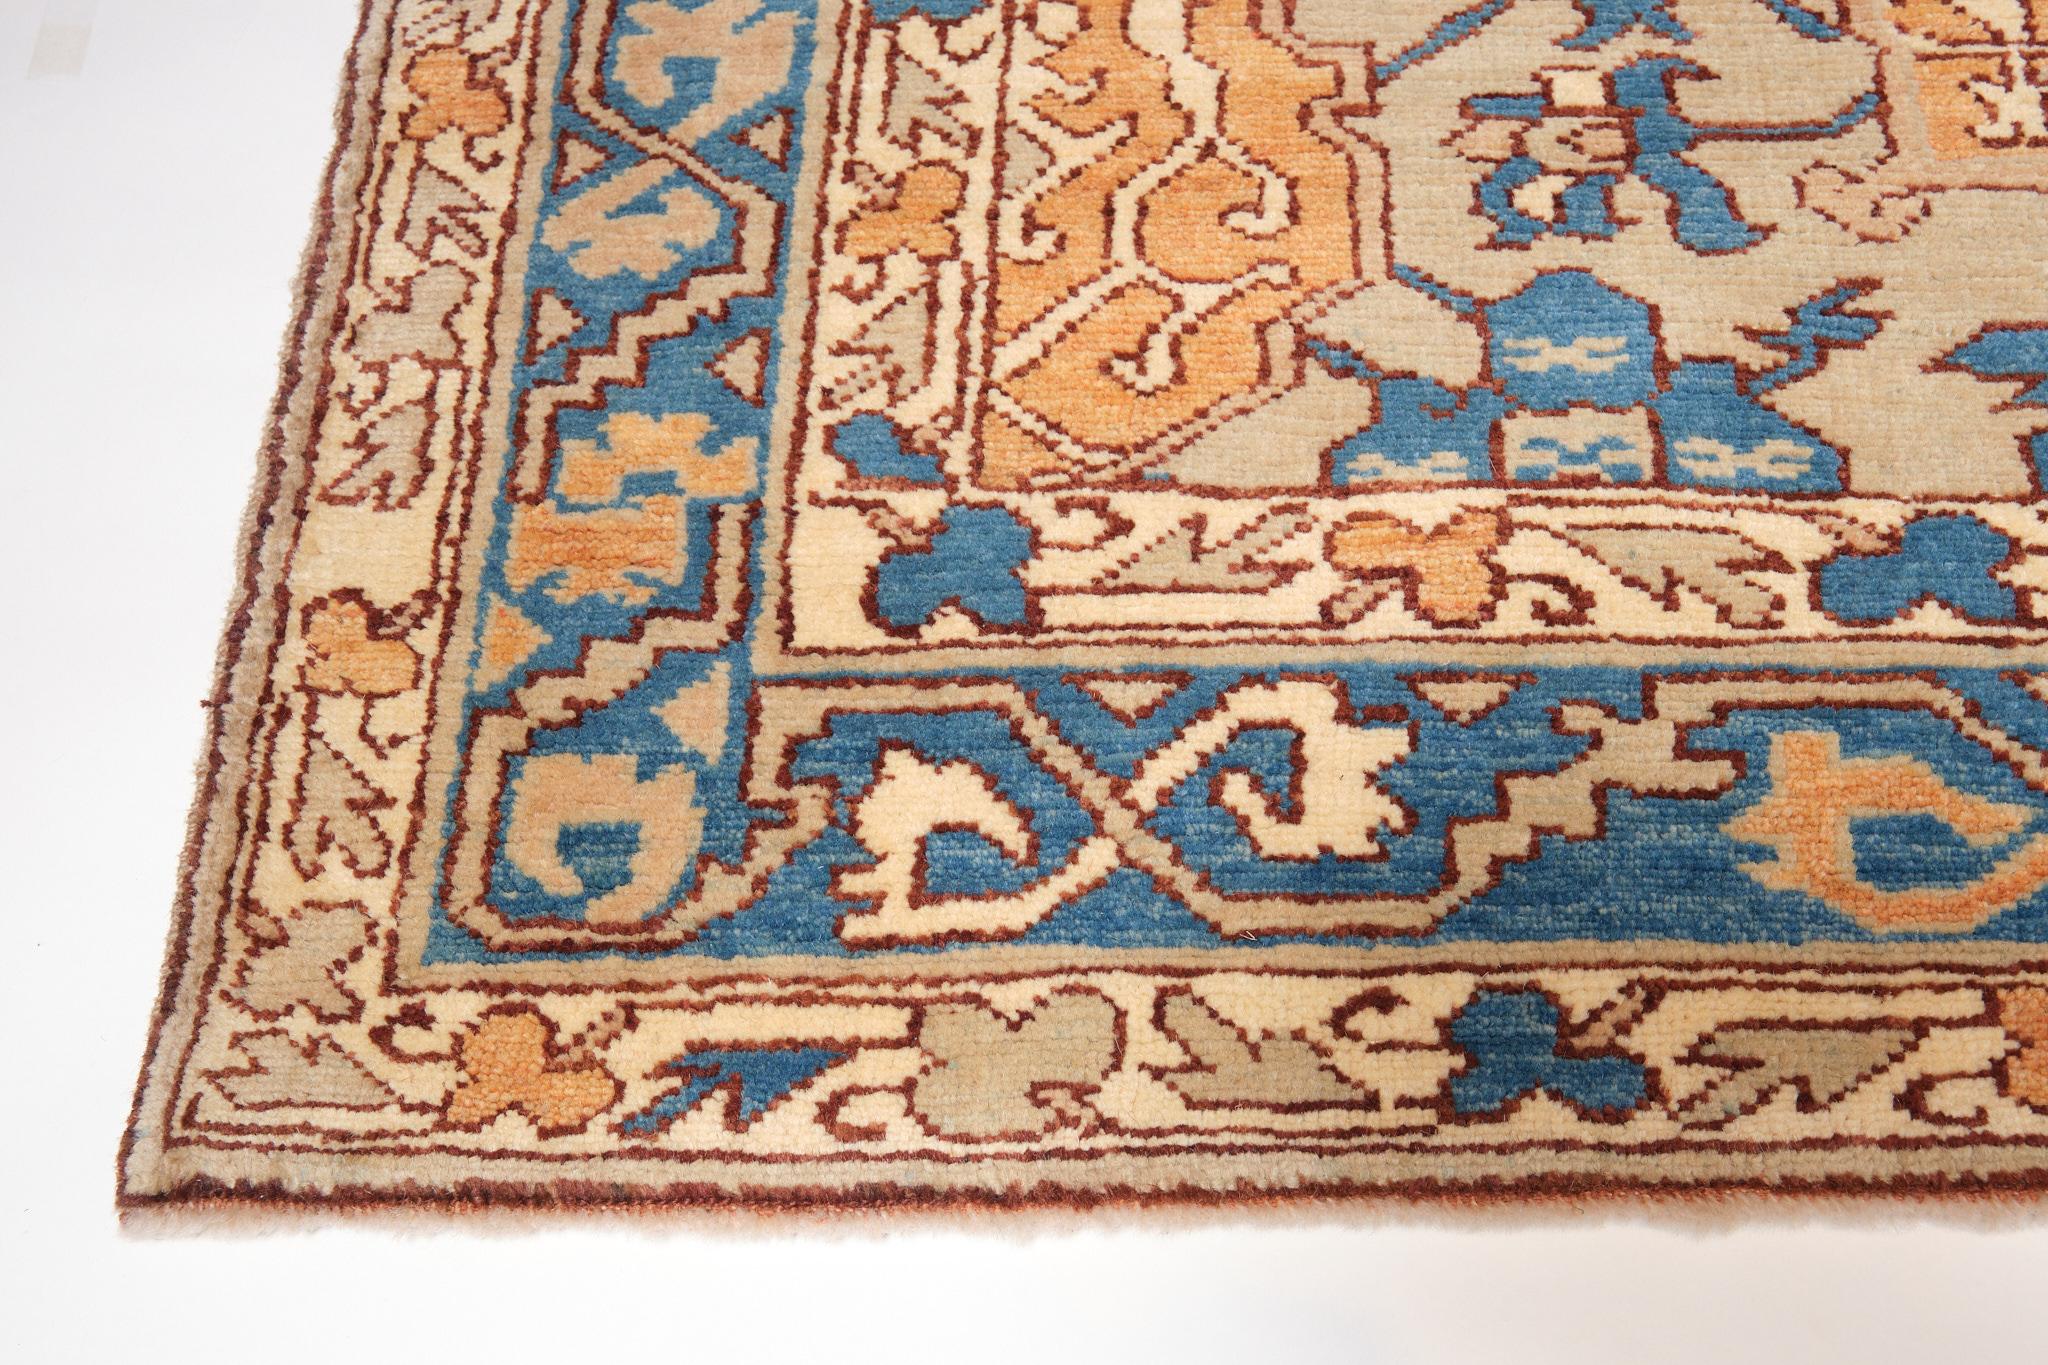 The source of the carpet comes from the book How to Read – Islamic Carpets, Walter B. Denny, The Metropolitan Museum of Art, New York 2014 fig.46-47 and Oriental Rugs, Volume 4 Turkish, Kurt Zipper and Claudia Fritzsche, Antique Collectors’ Club,